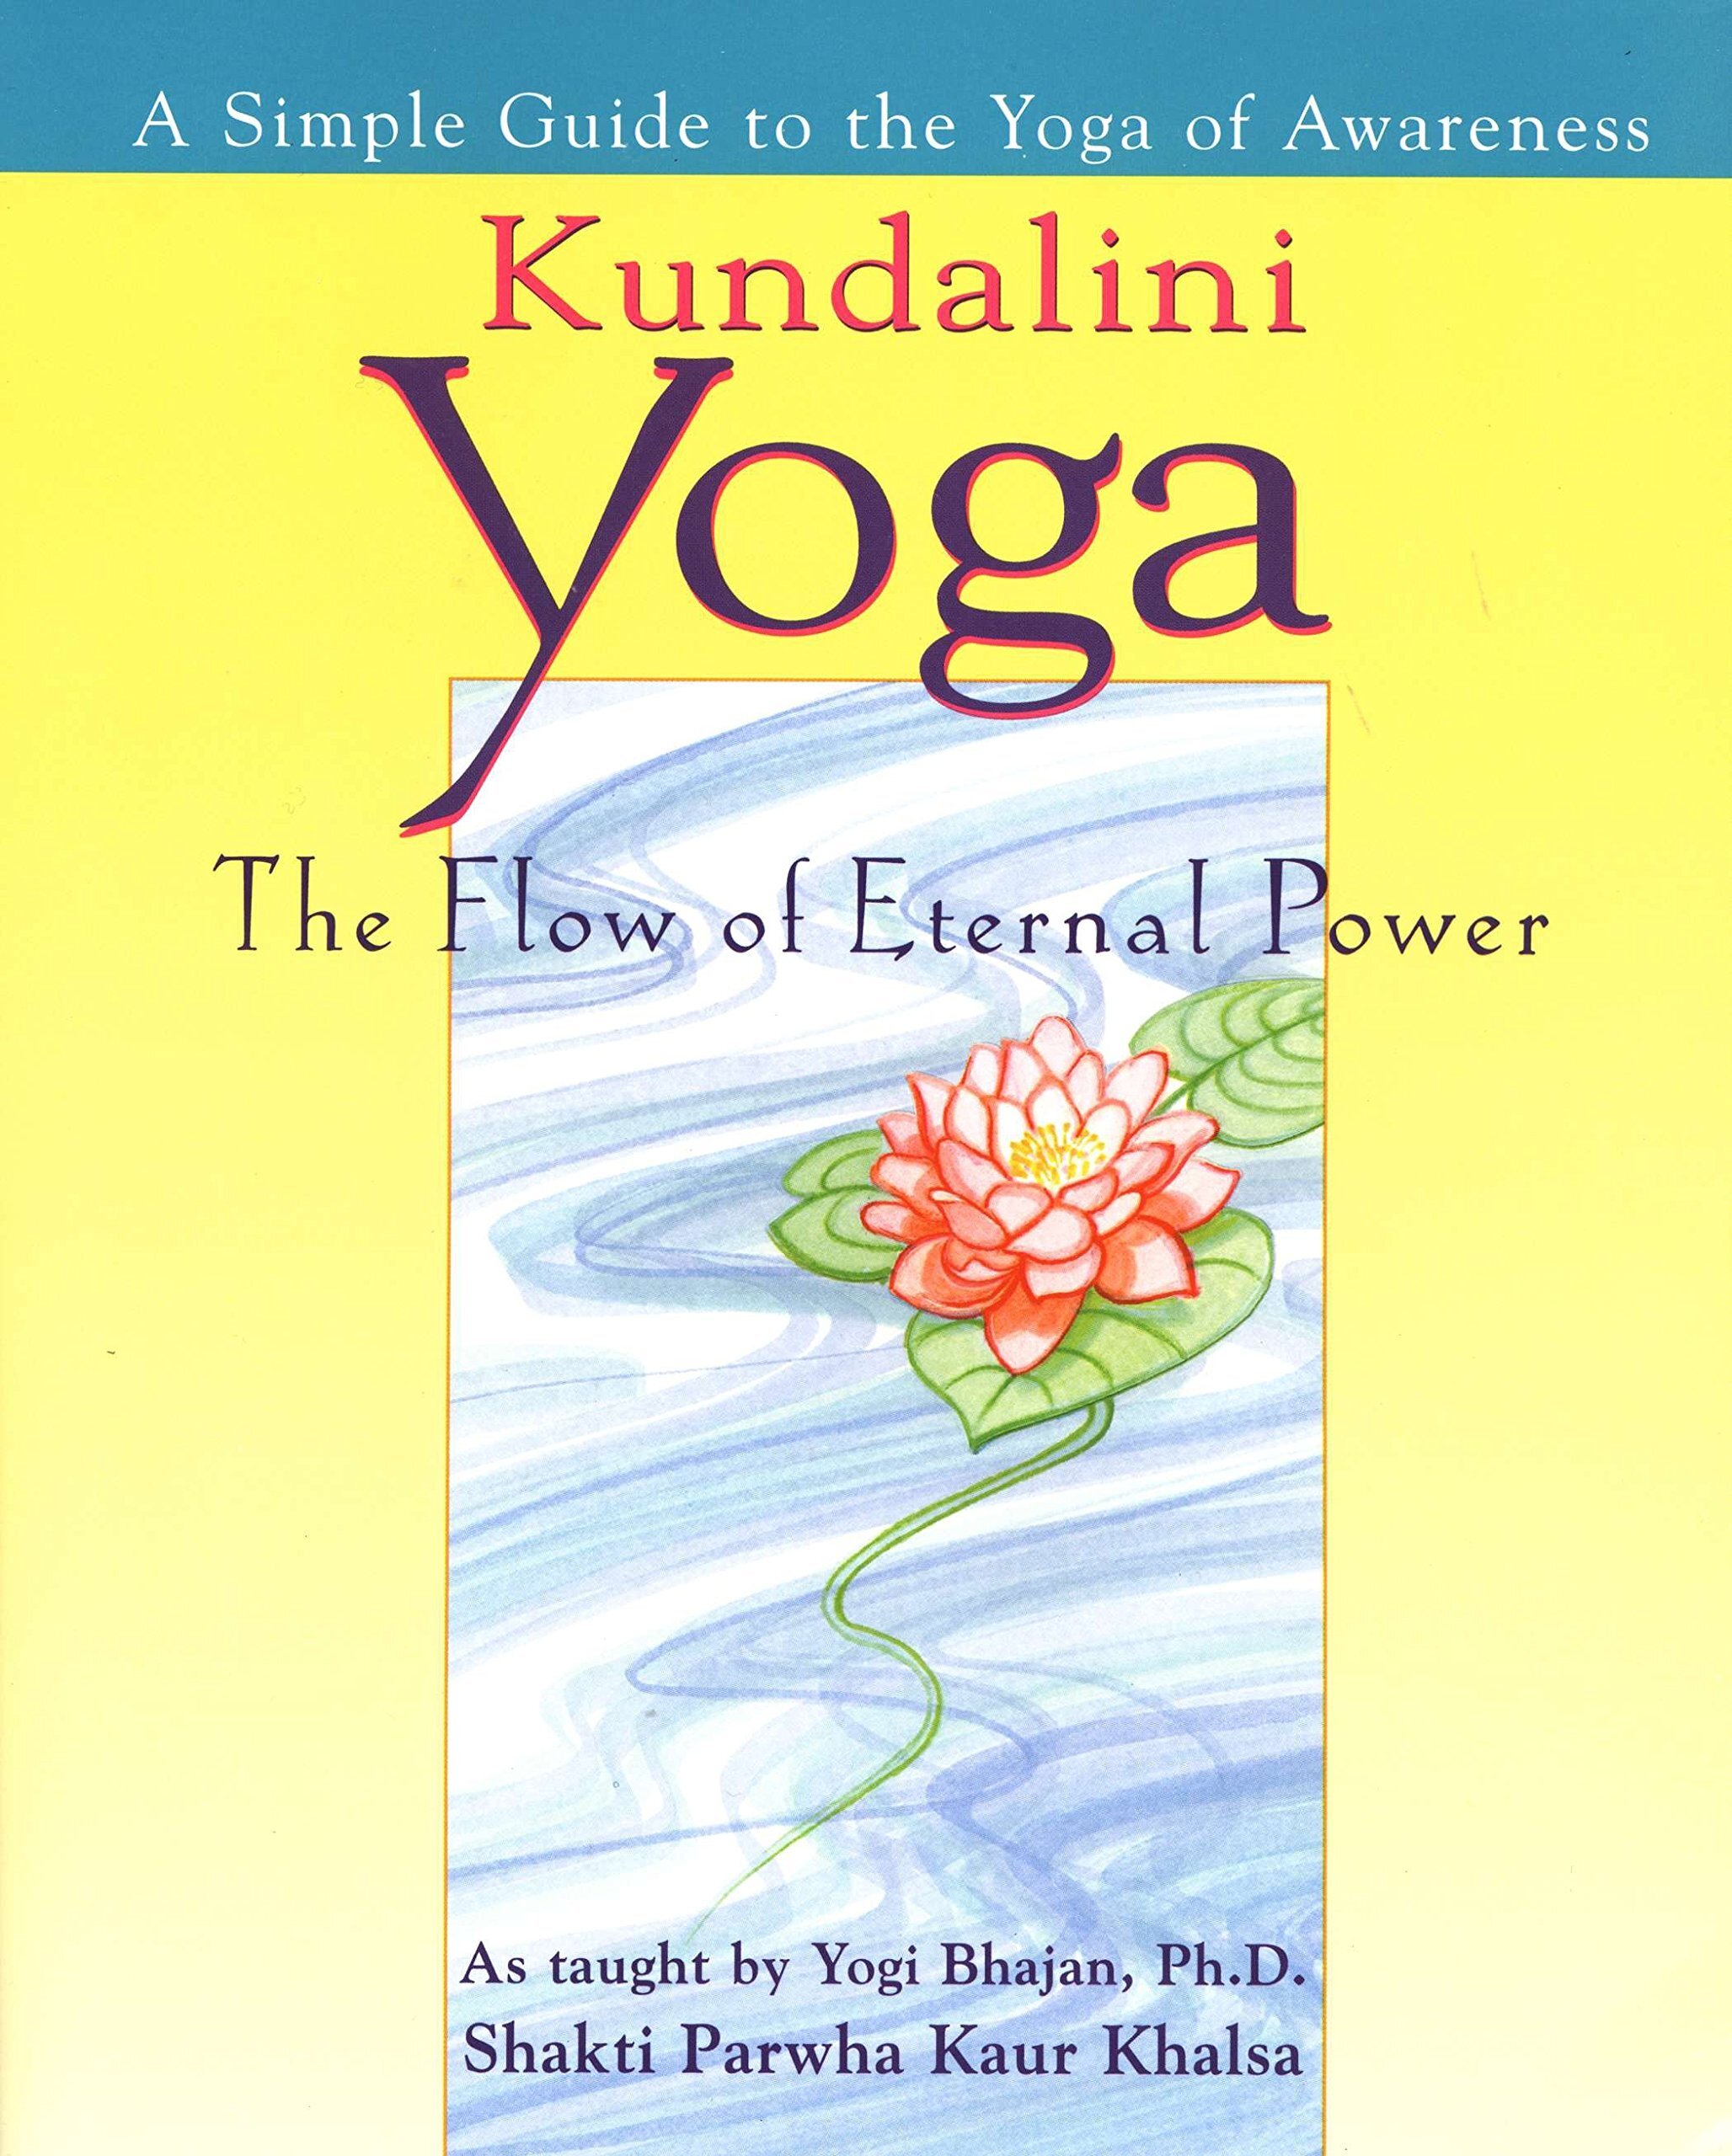 Kundalini Yoga: The Flow of Eternal Power: A Simple Guide to the Yoga of Awareness as taught by Yogi Bhajan